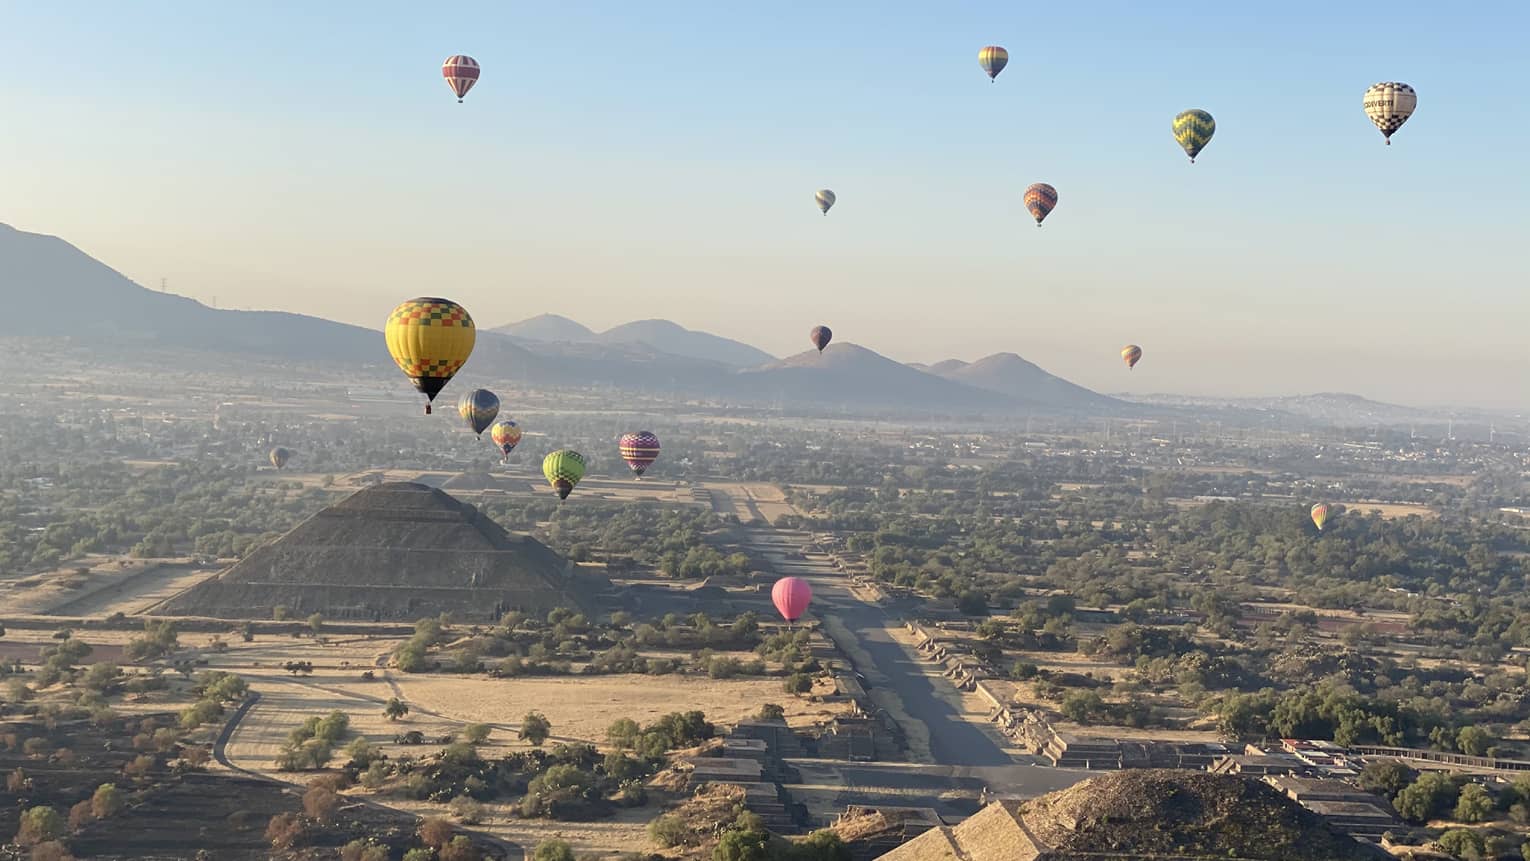 Colourful hot air balloons float above the Teotihuacan pyramids with hills in the distance on a clear, sunny day